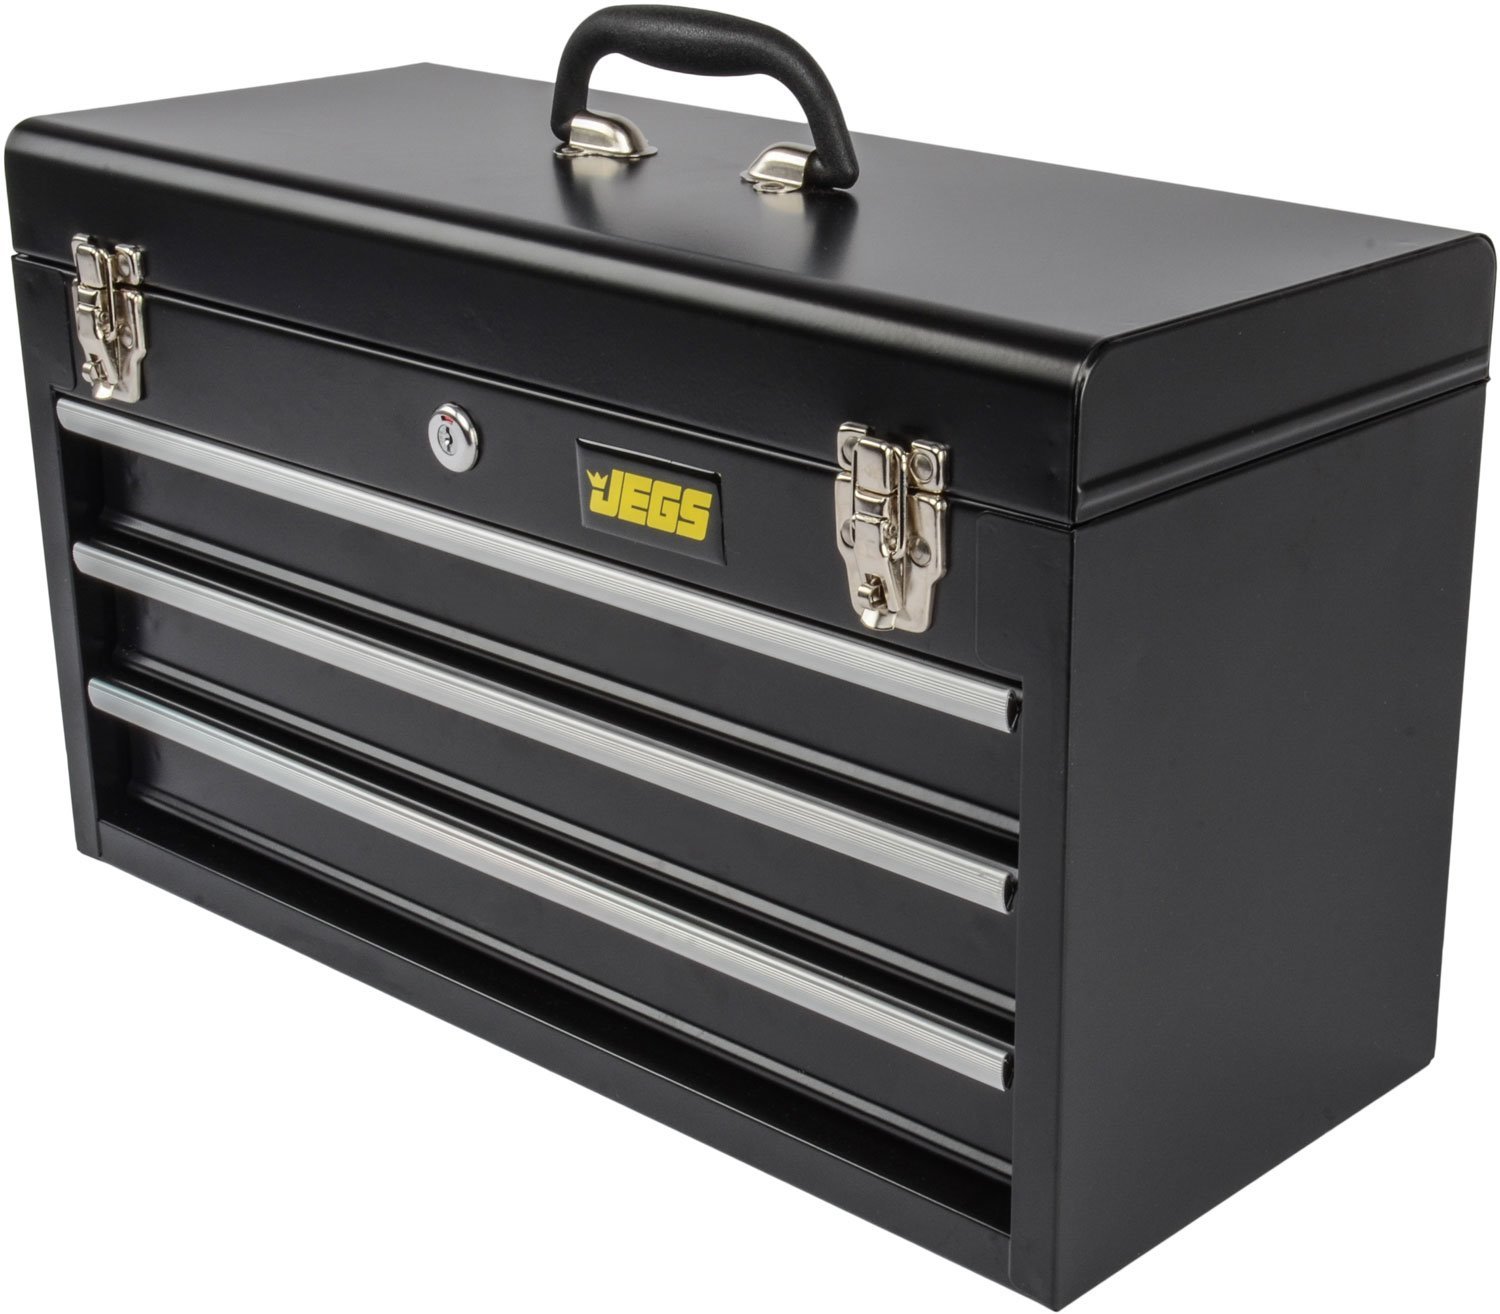 3 Drawer Tool Box | Purchase a Portable 3 Drawer Tool Chest Online - JEGS